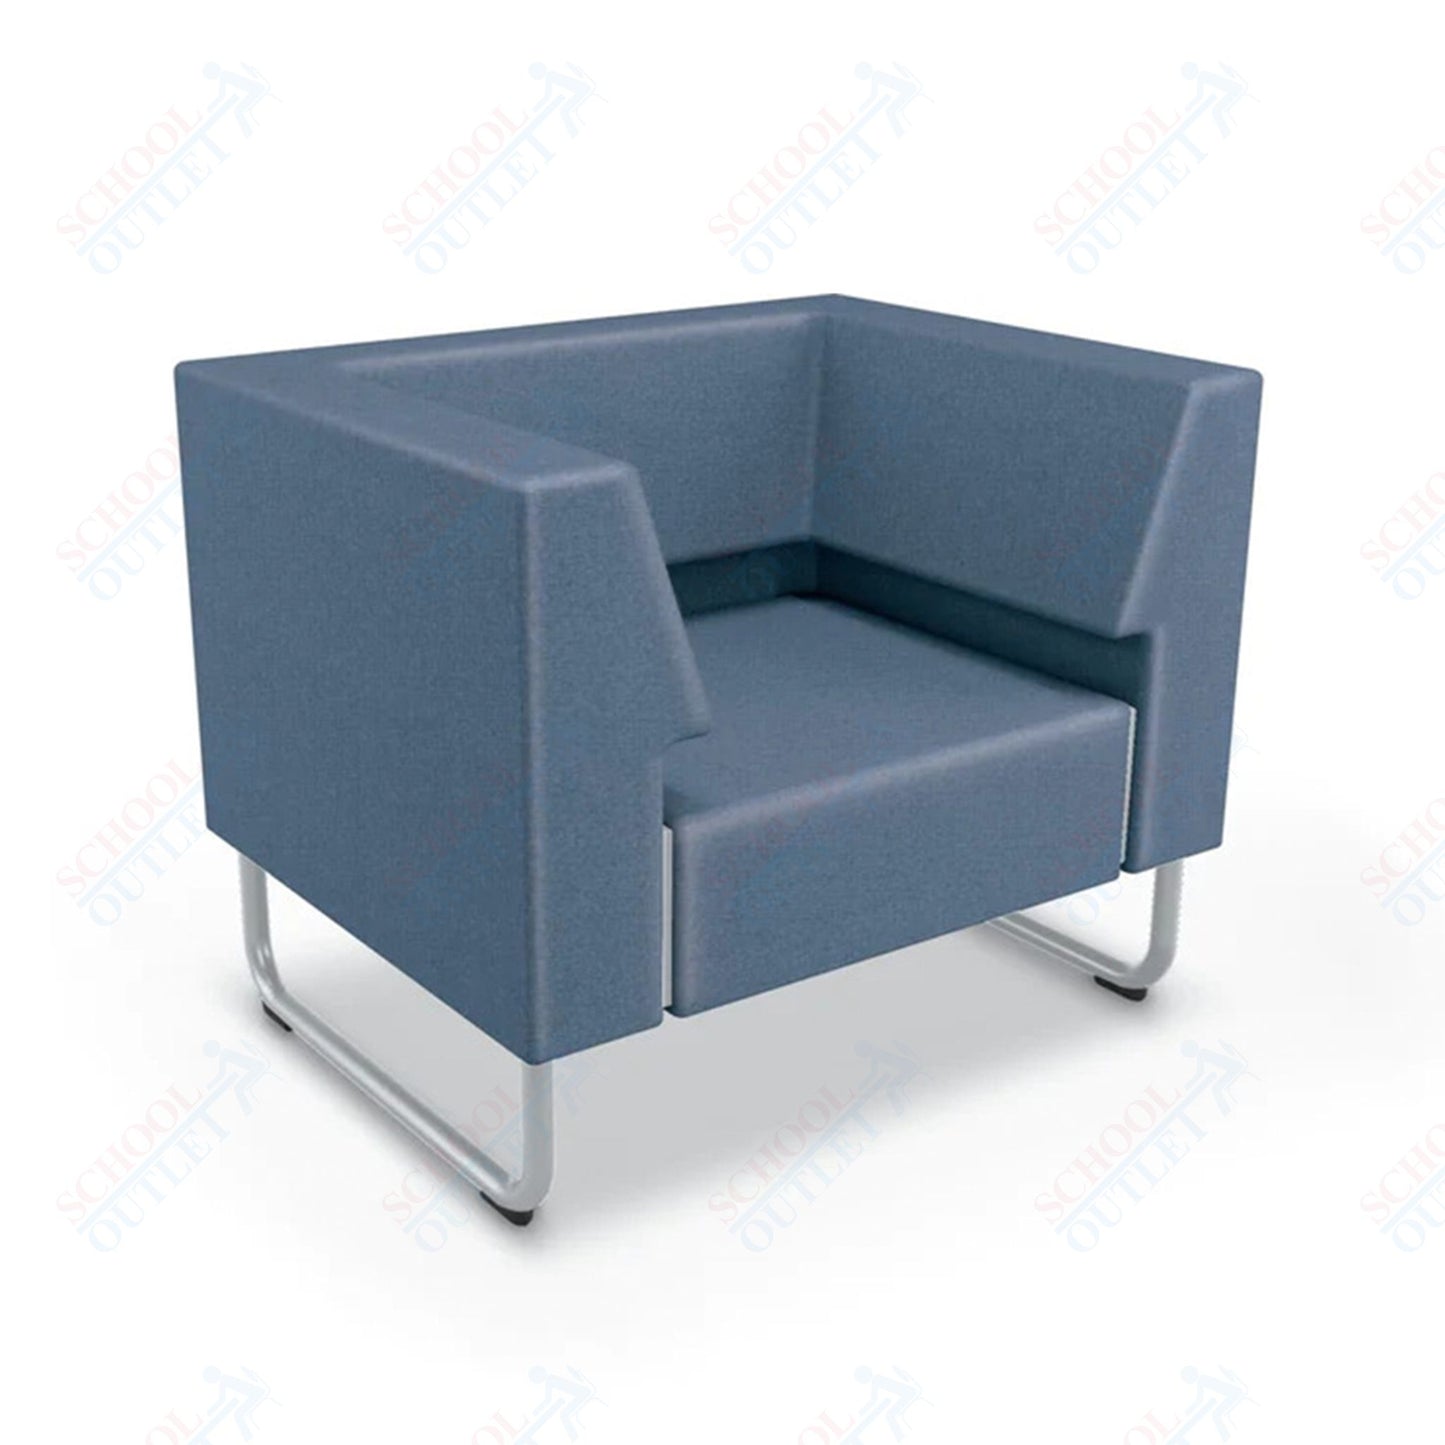 Mooreco Akt Soft Seating Lounge Chair - Both Arms - Grade 02 Fabric and Powder Coated Sled Legs